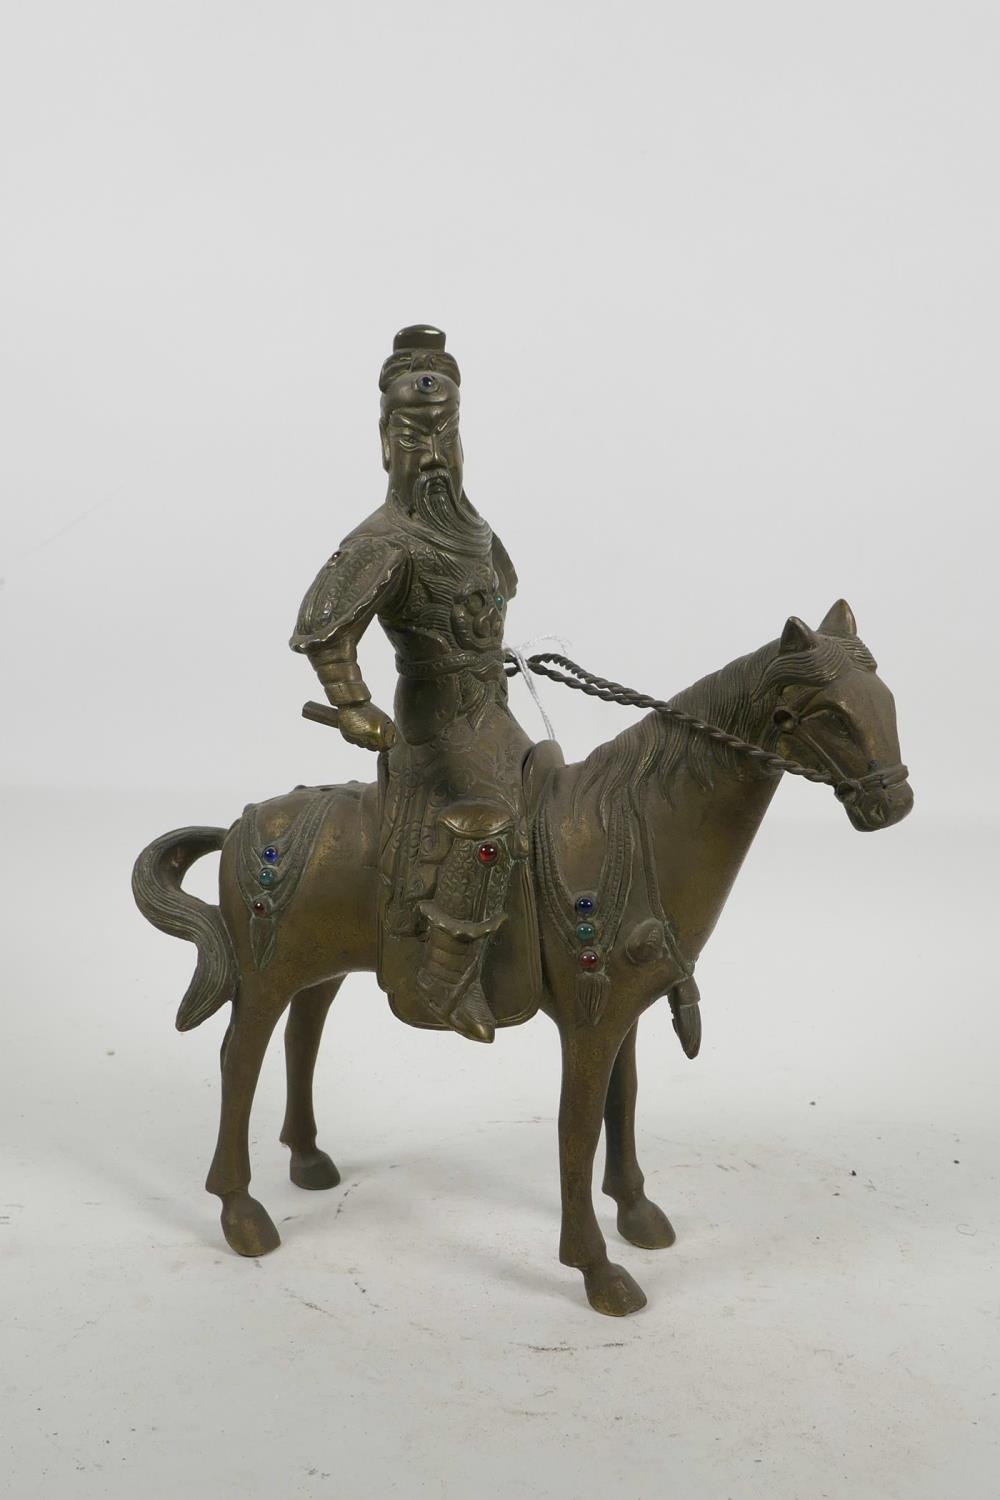 A Mongolian brass figurine of a warrior on horseback with